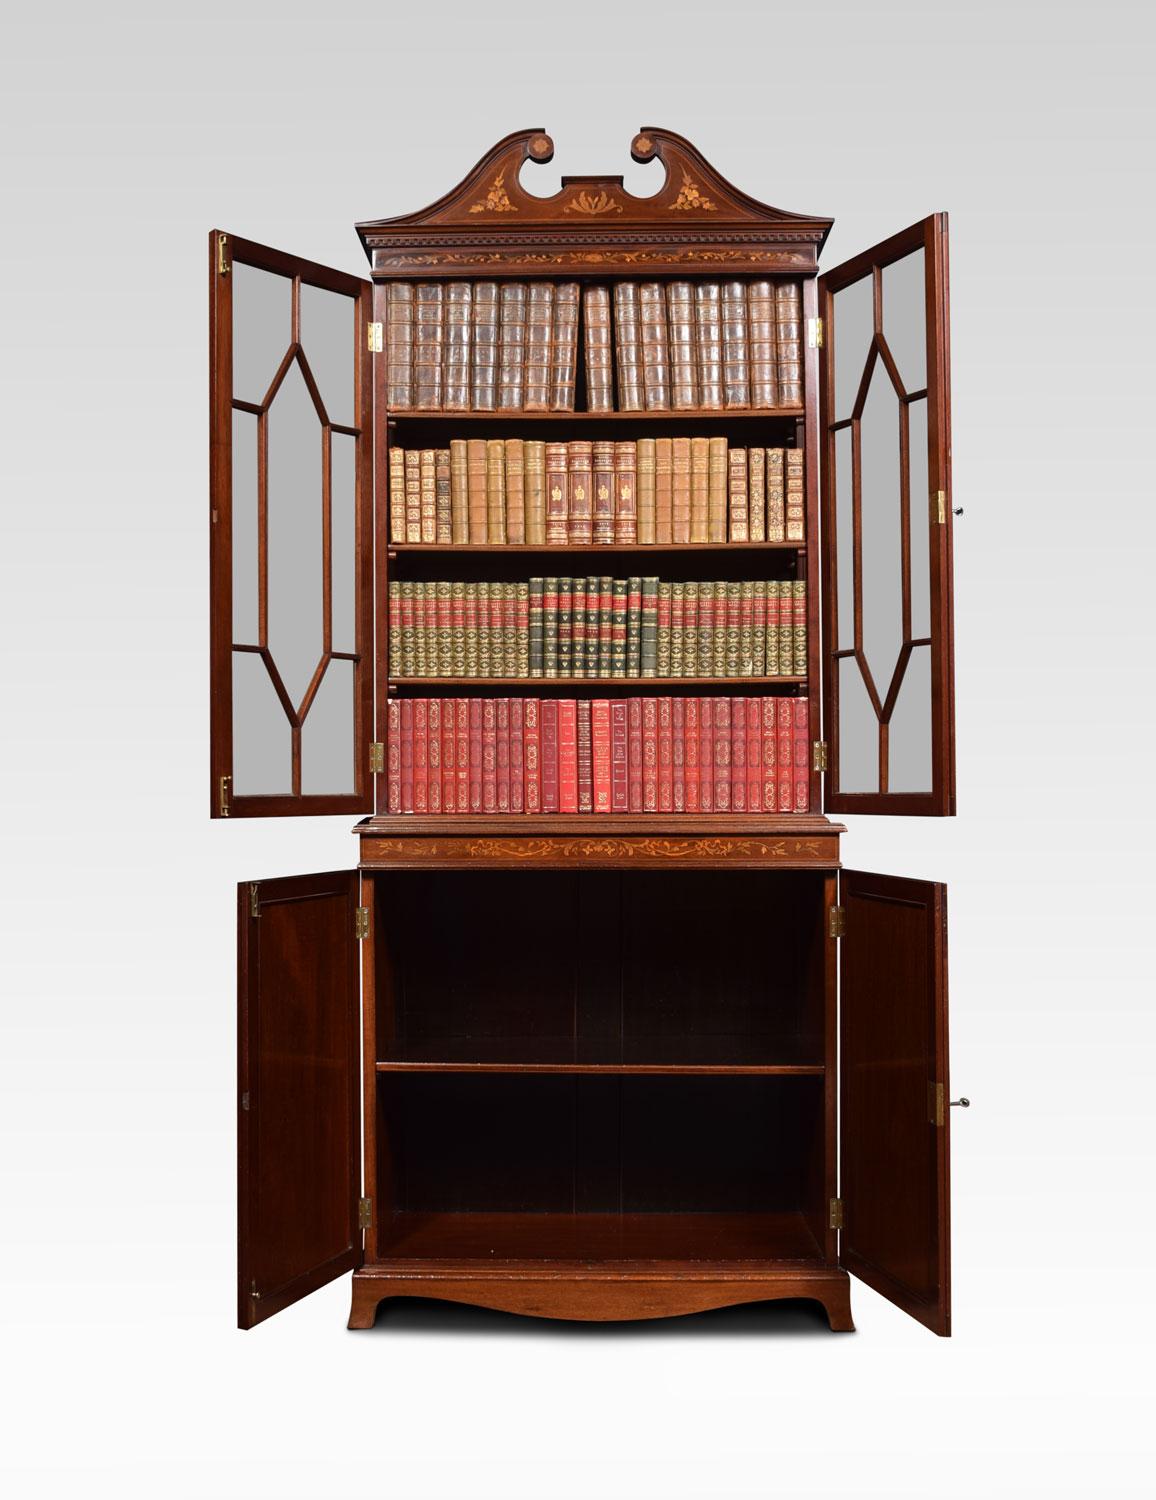 Mahogany inlaid cabinet or bookcase in the manner of Edwards & Roberts of London. The upper section with swan neck pediment and marquetry pen-work frieze. The twin astragal glazed doors open to reveal shelved interior. The solid mahogany sides with